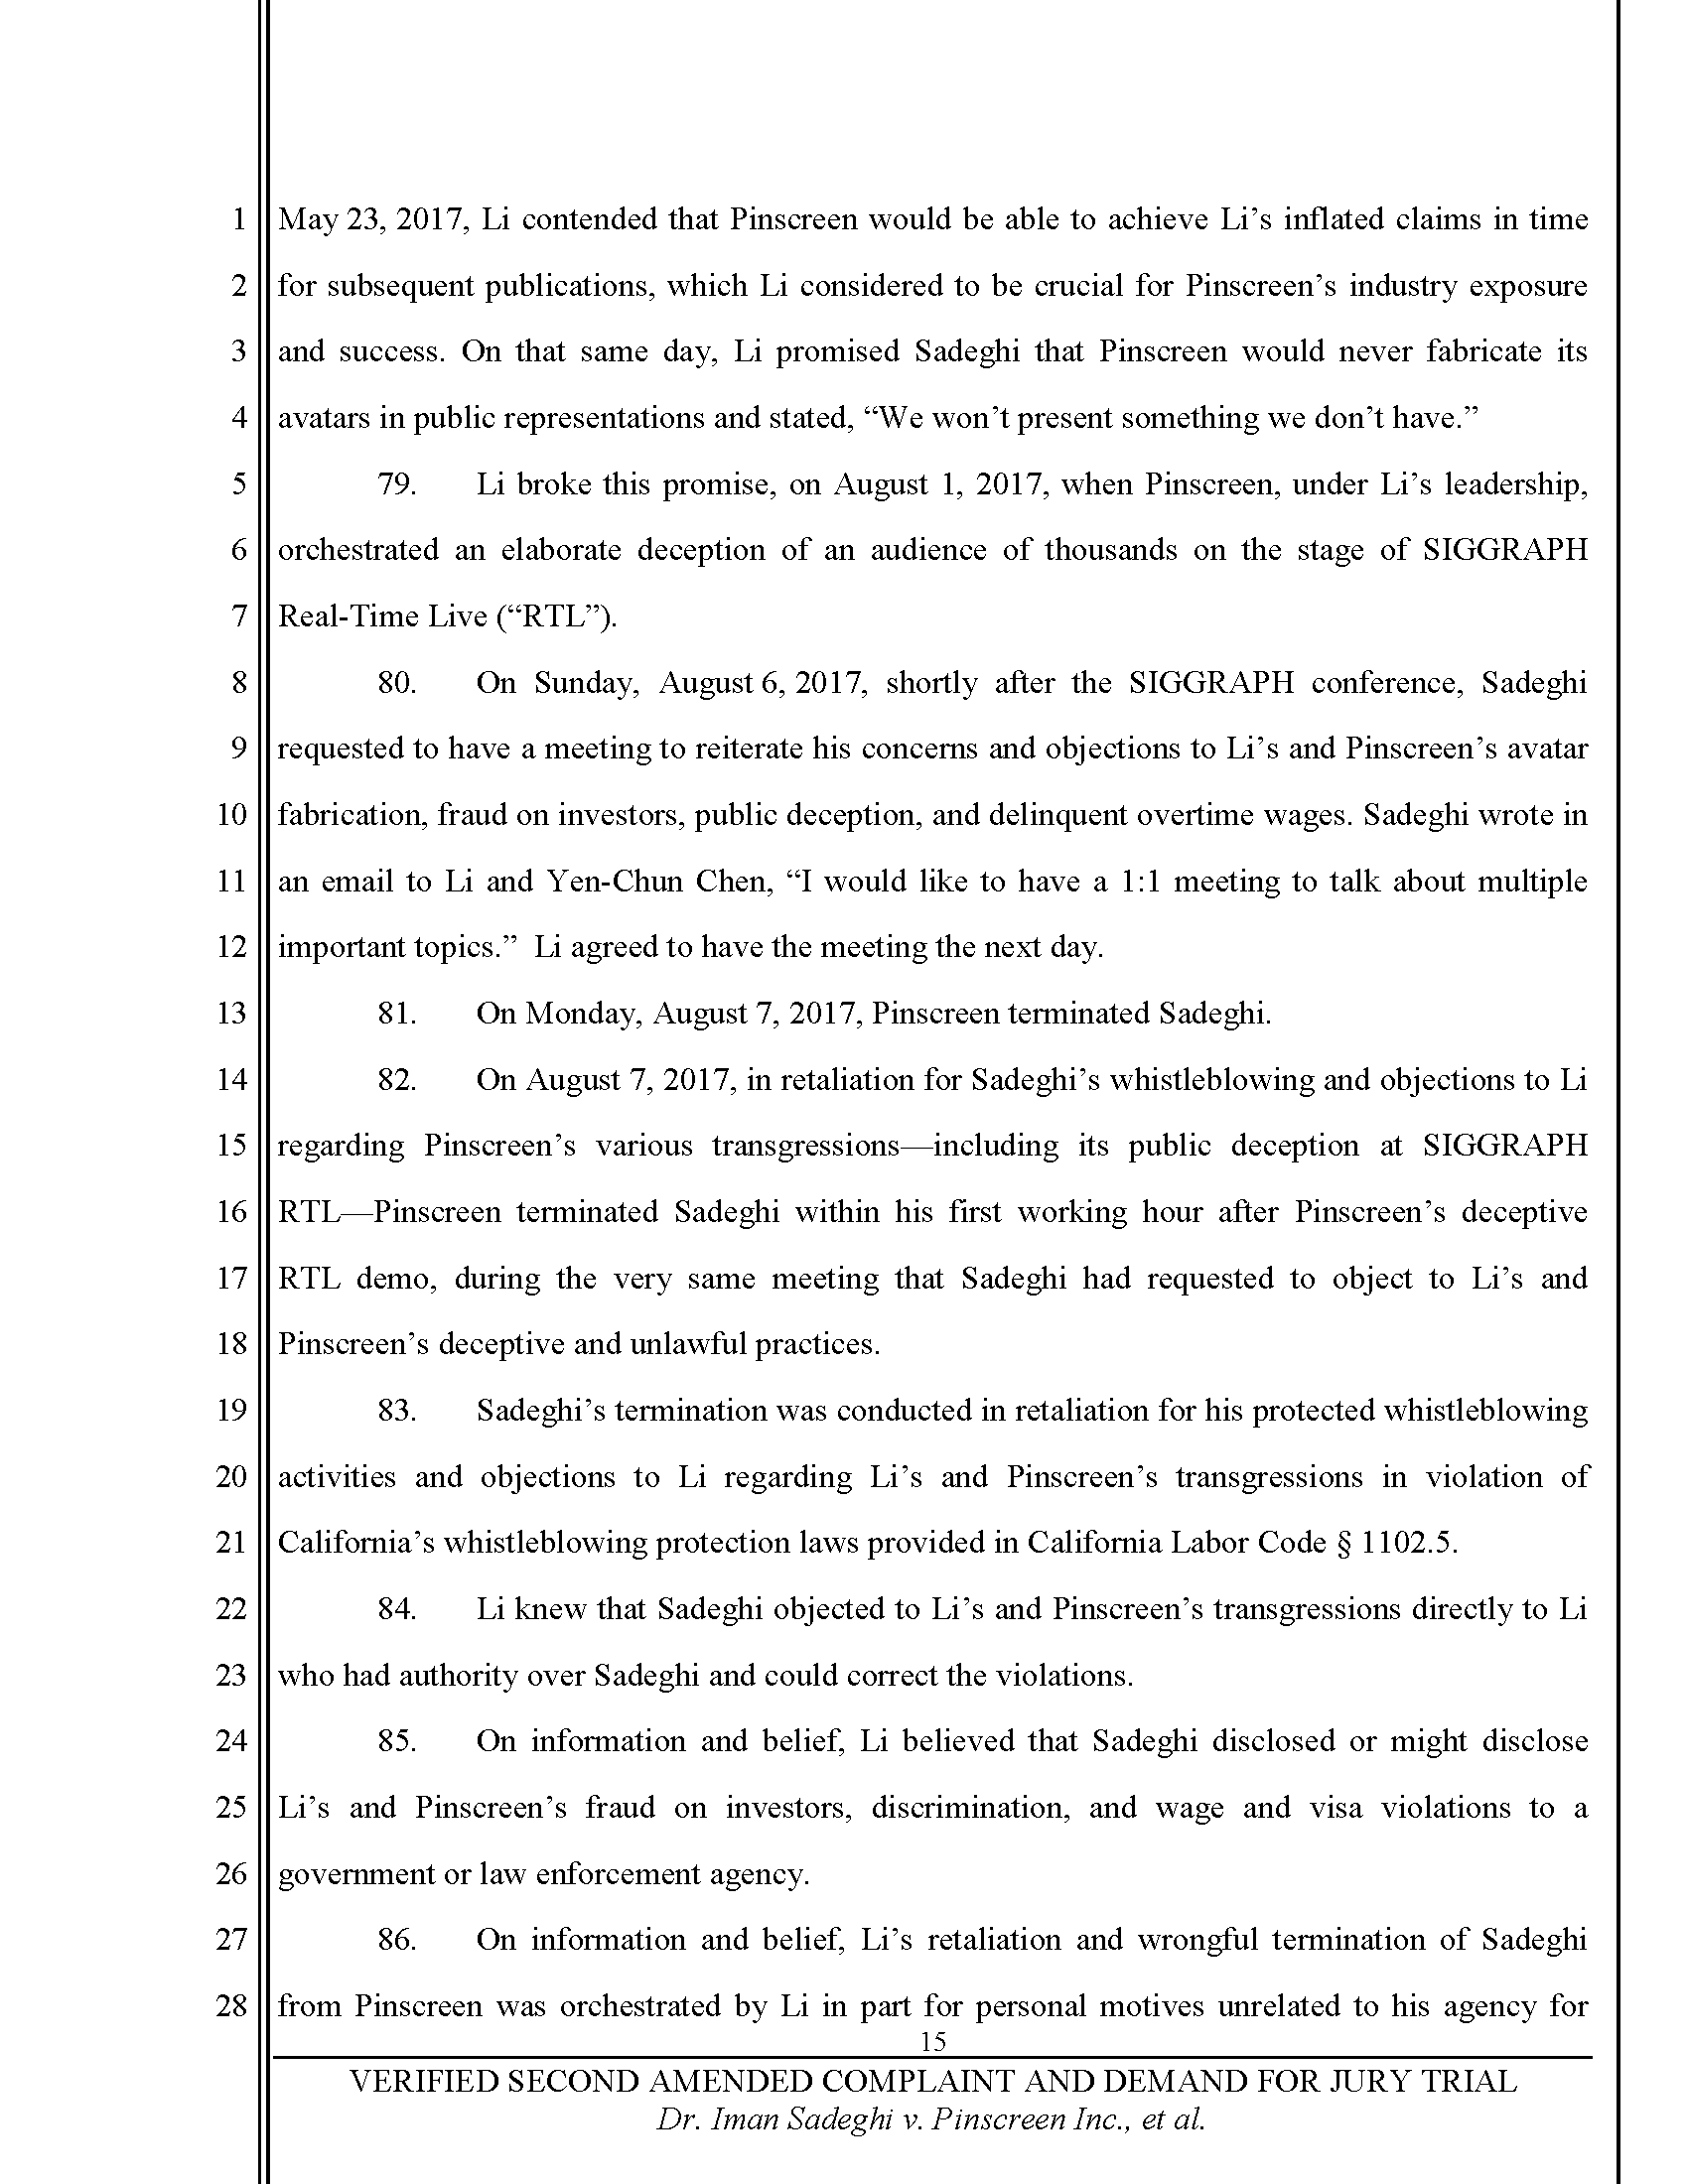 Second Amended Complaint (SAC) Page 16